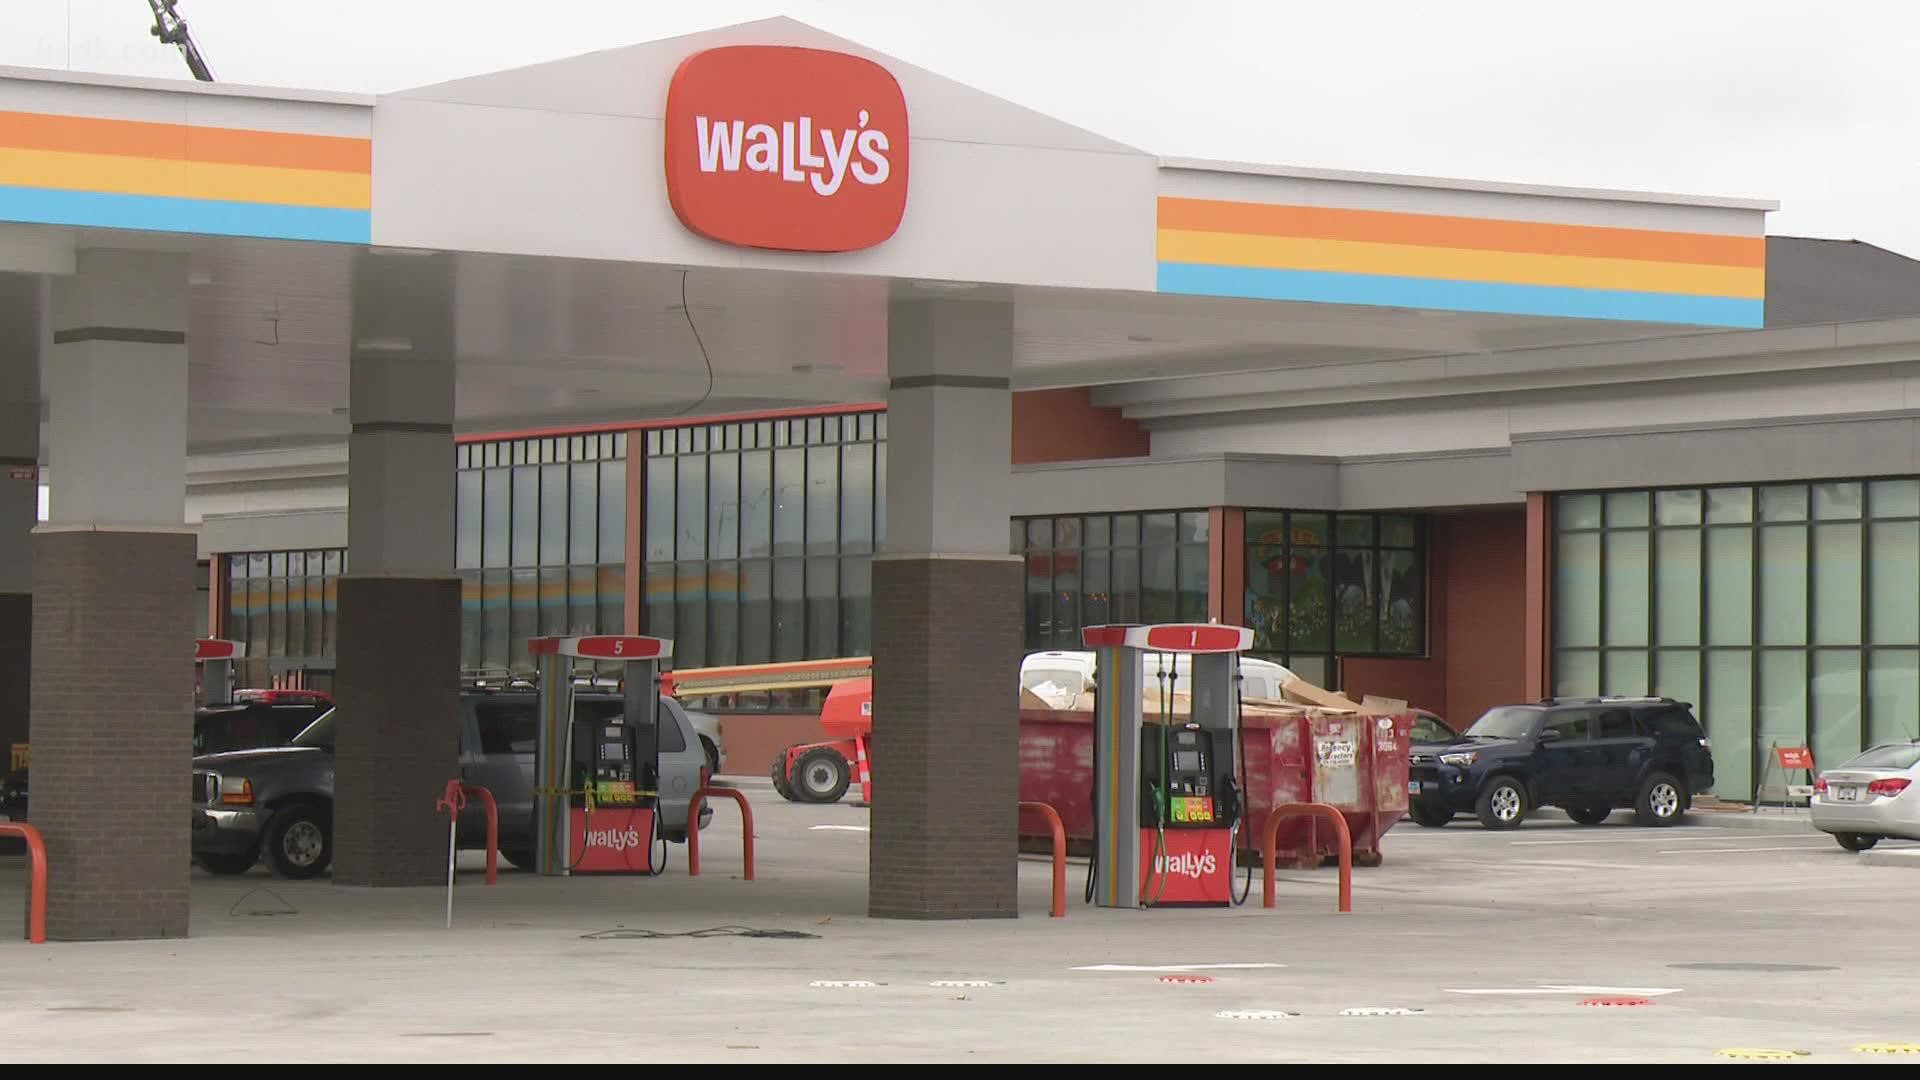 Wally's had their ribbon cutting ceremony Friday. It is the first Wally's location in the St. Louis area.